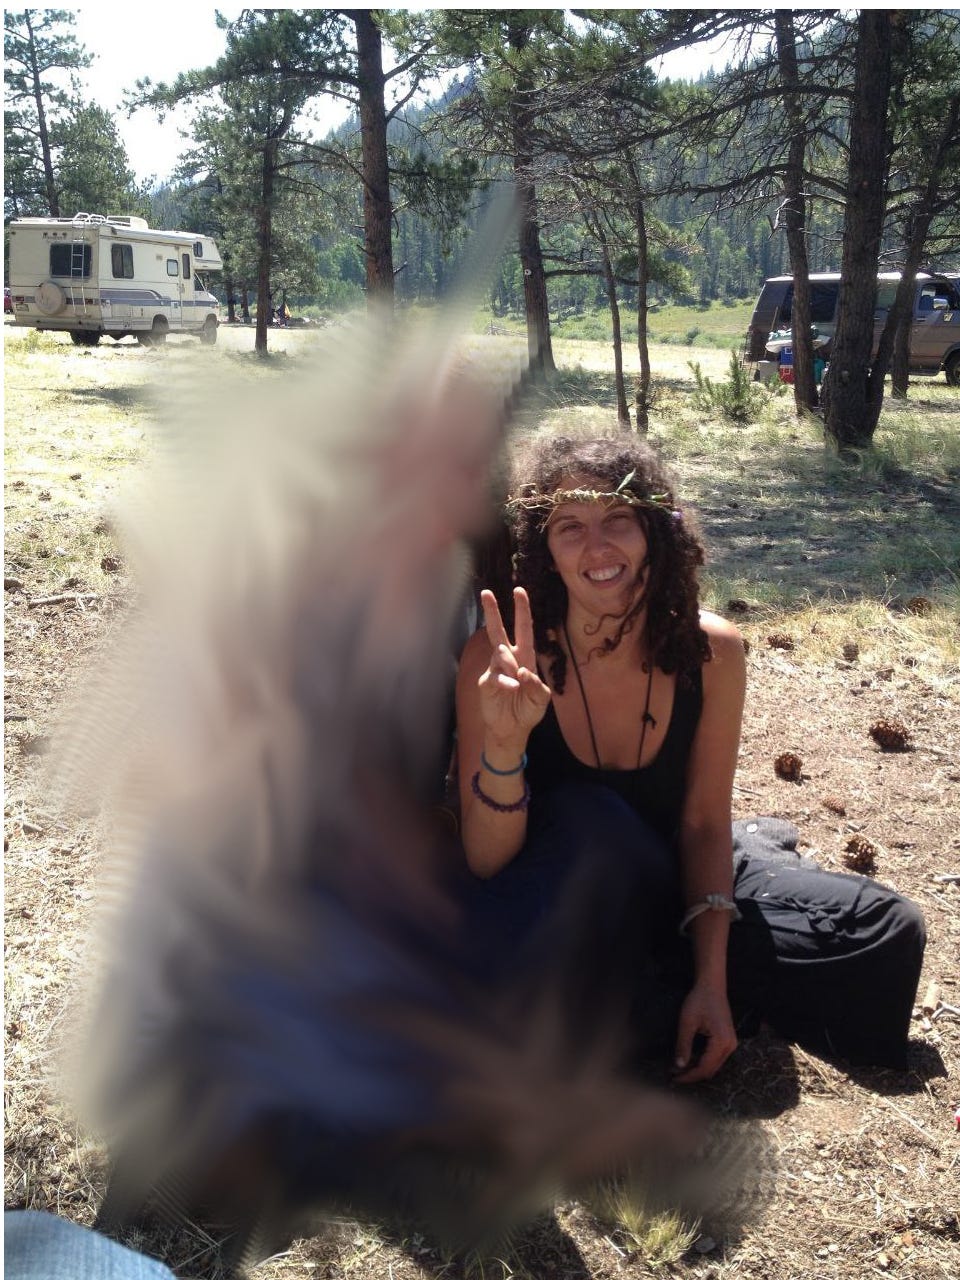 A photo of the author wearing a Crown of vines in a Colorado forest clearing, making a V sign with one hand, sitting cross-legged on the ground next to another person who is blurred out for anonymity purposes.